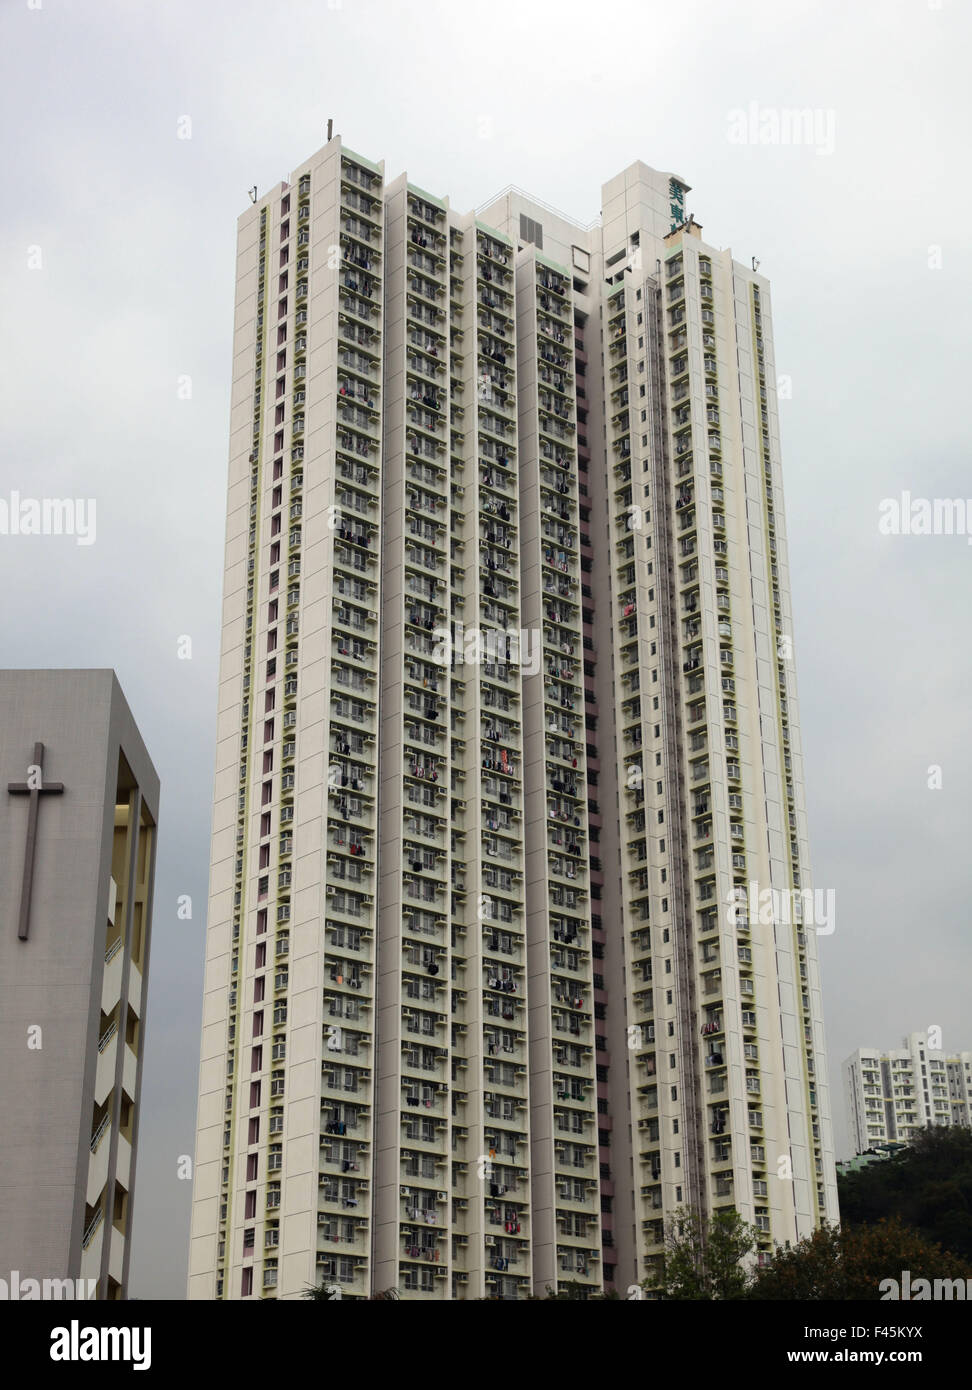 It's a photo of Hong Kong towers in the Tseung Kwan O Area. It's development construction for flats Stock Photo